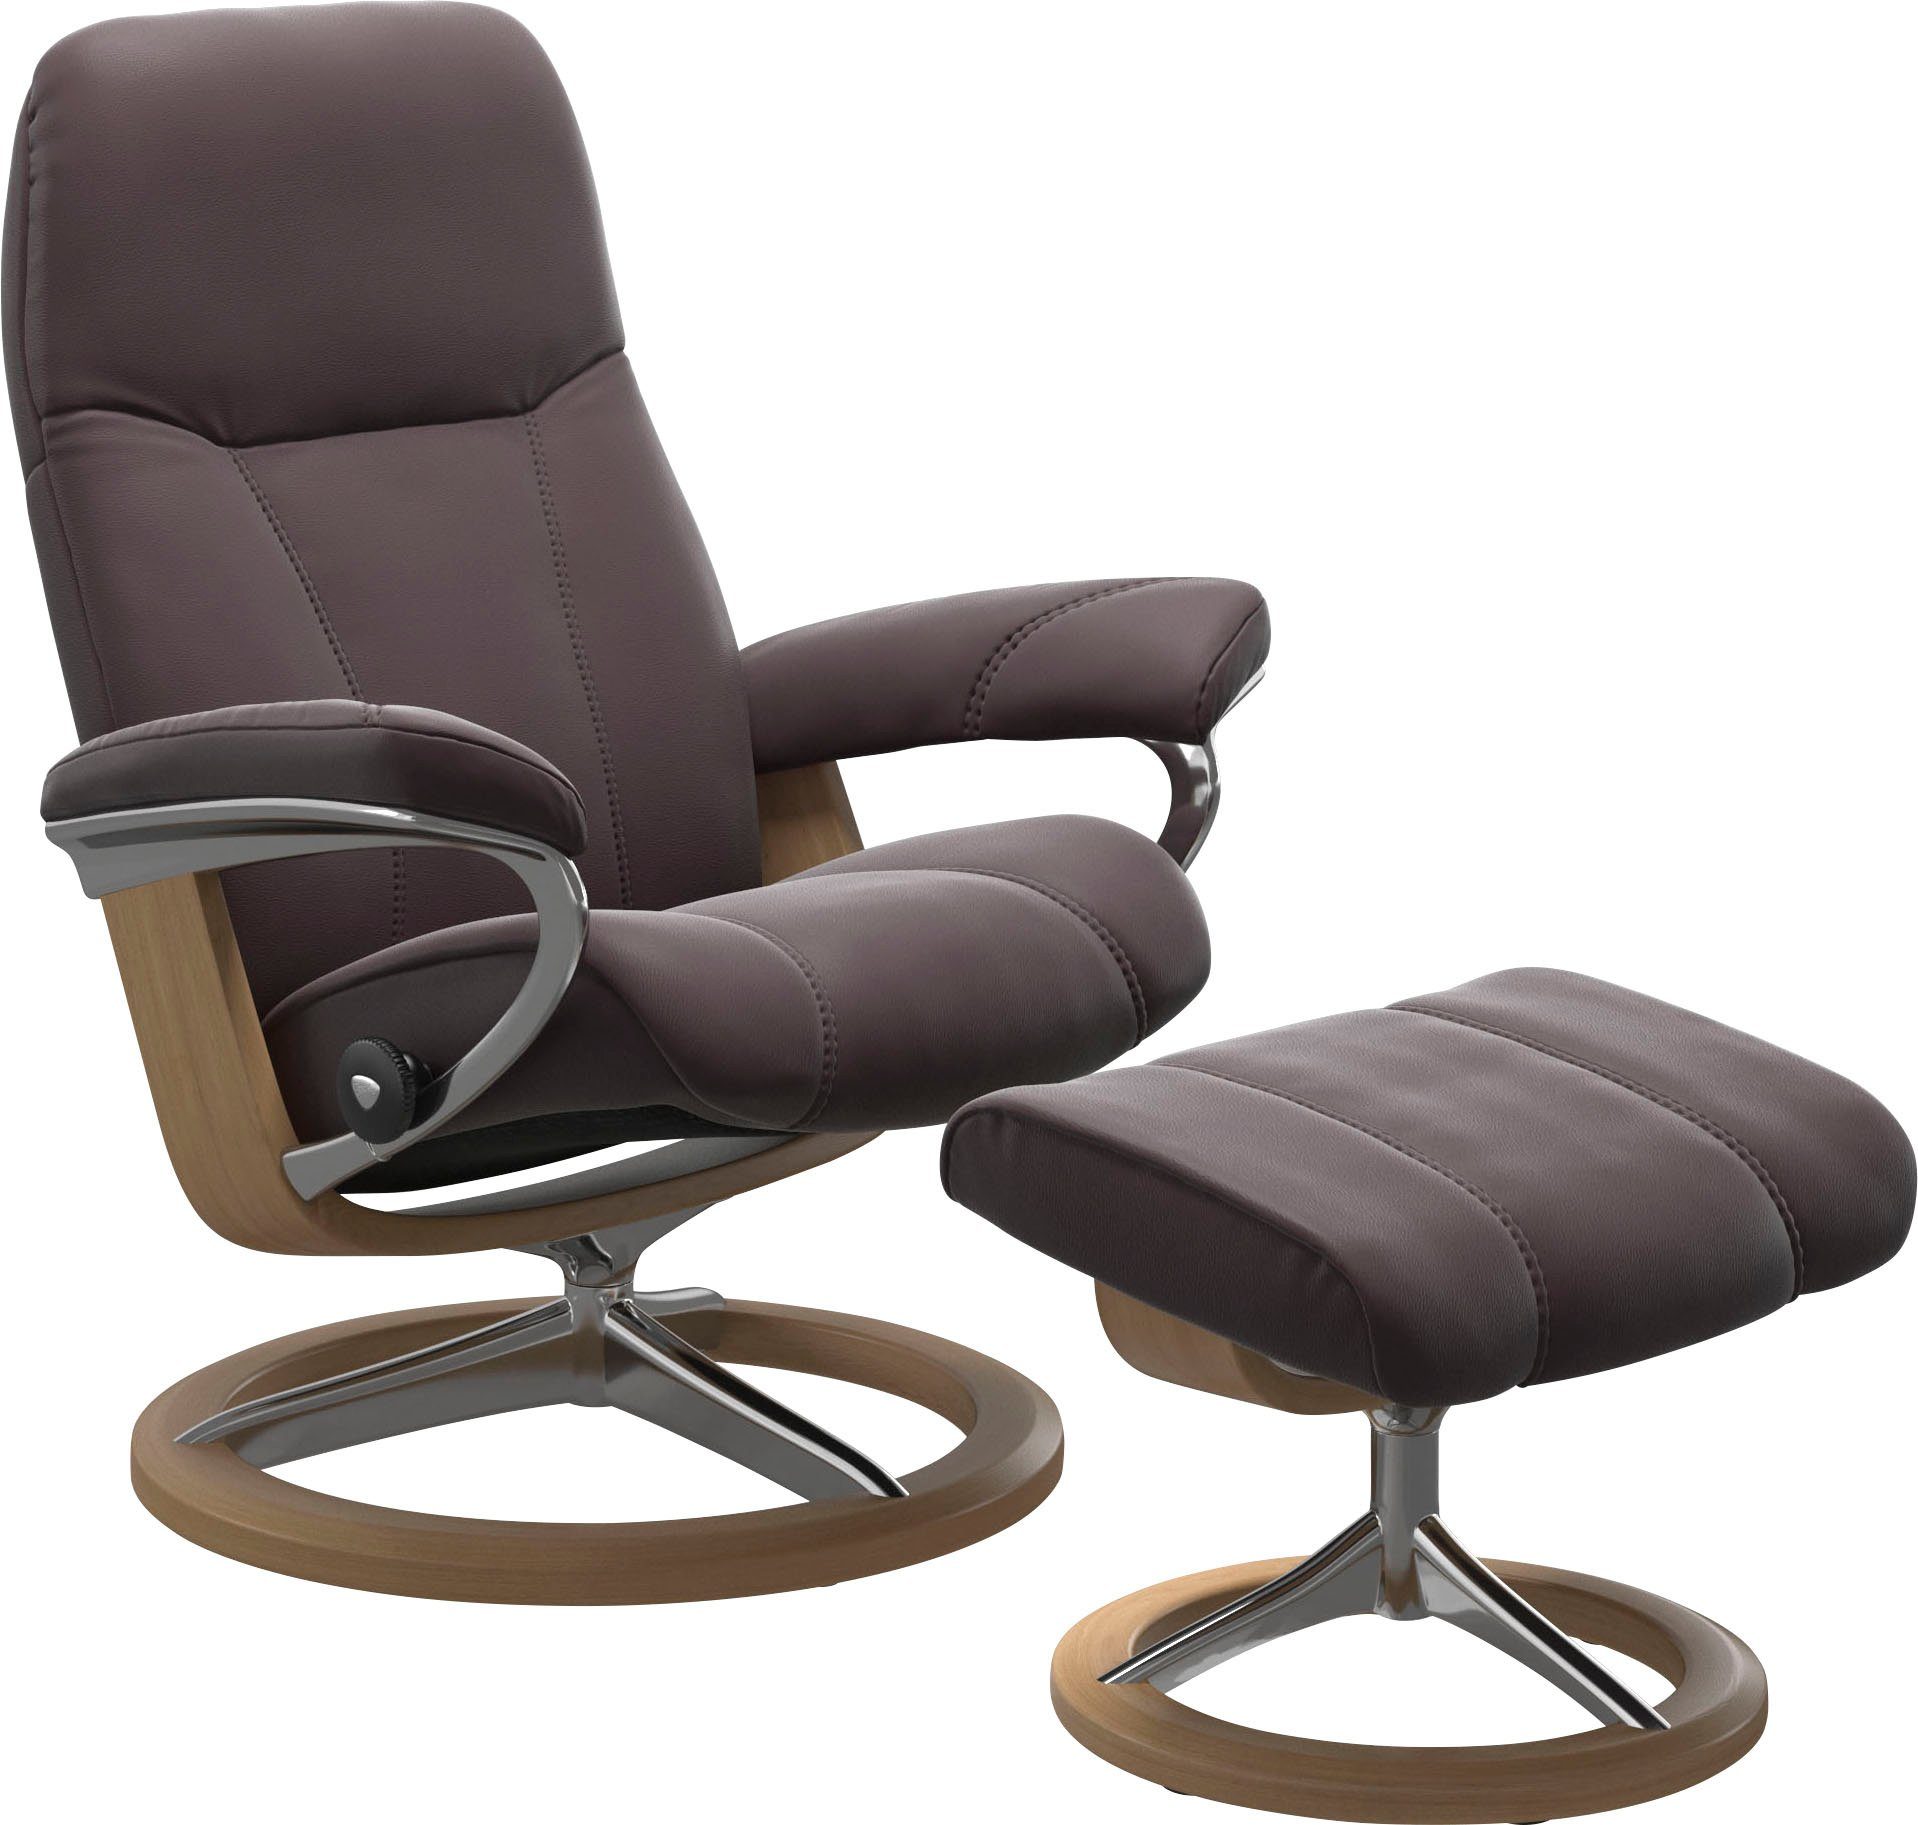 Stressless® Relaxsessel Consul, mit Signature Base, Größe S, Gestell Eiche | Funktionssessel